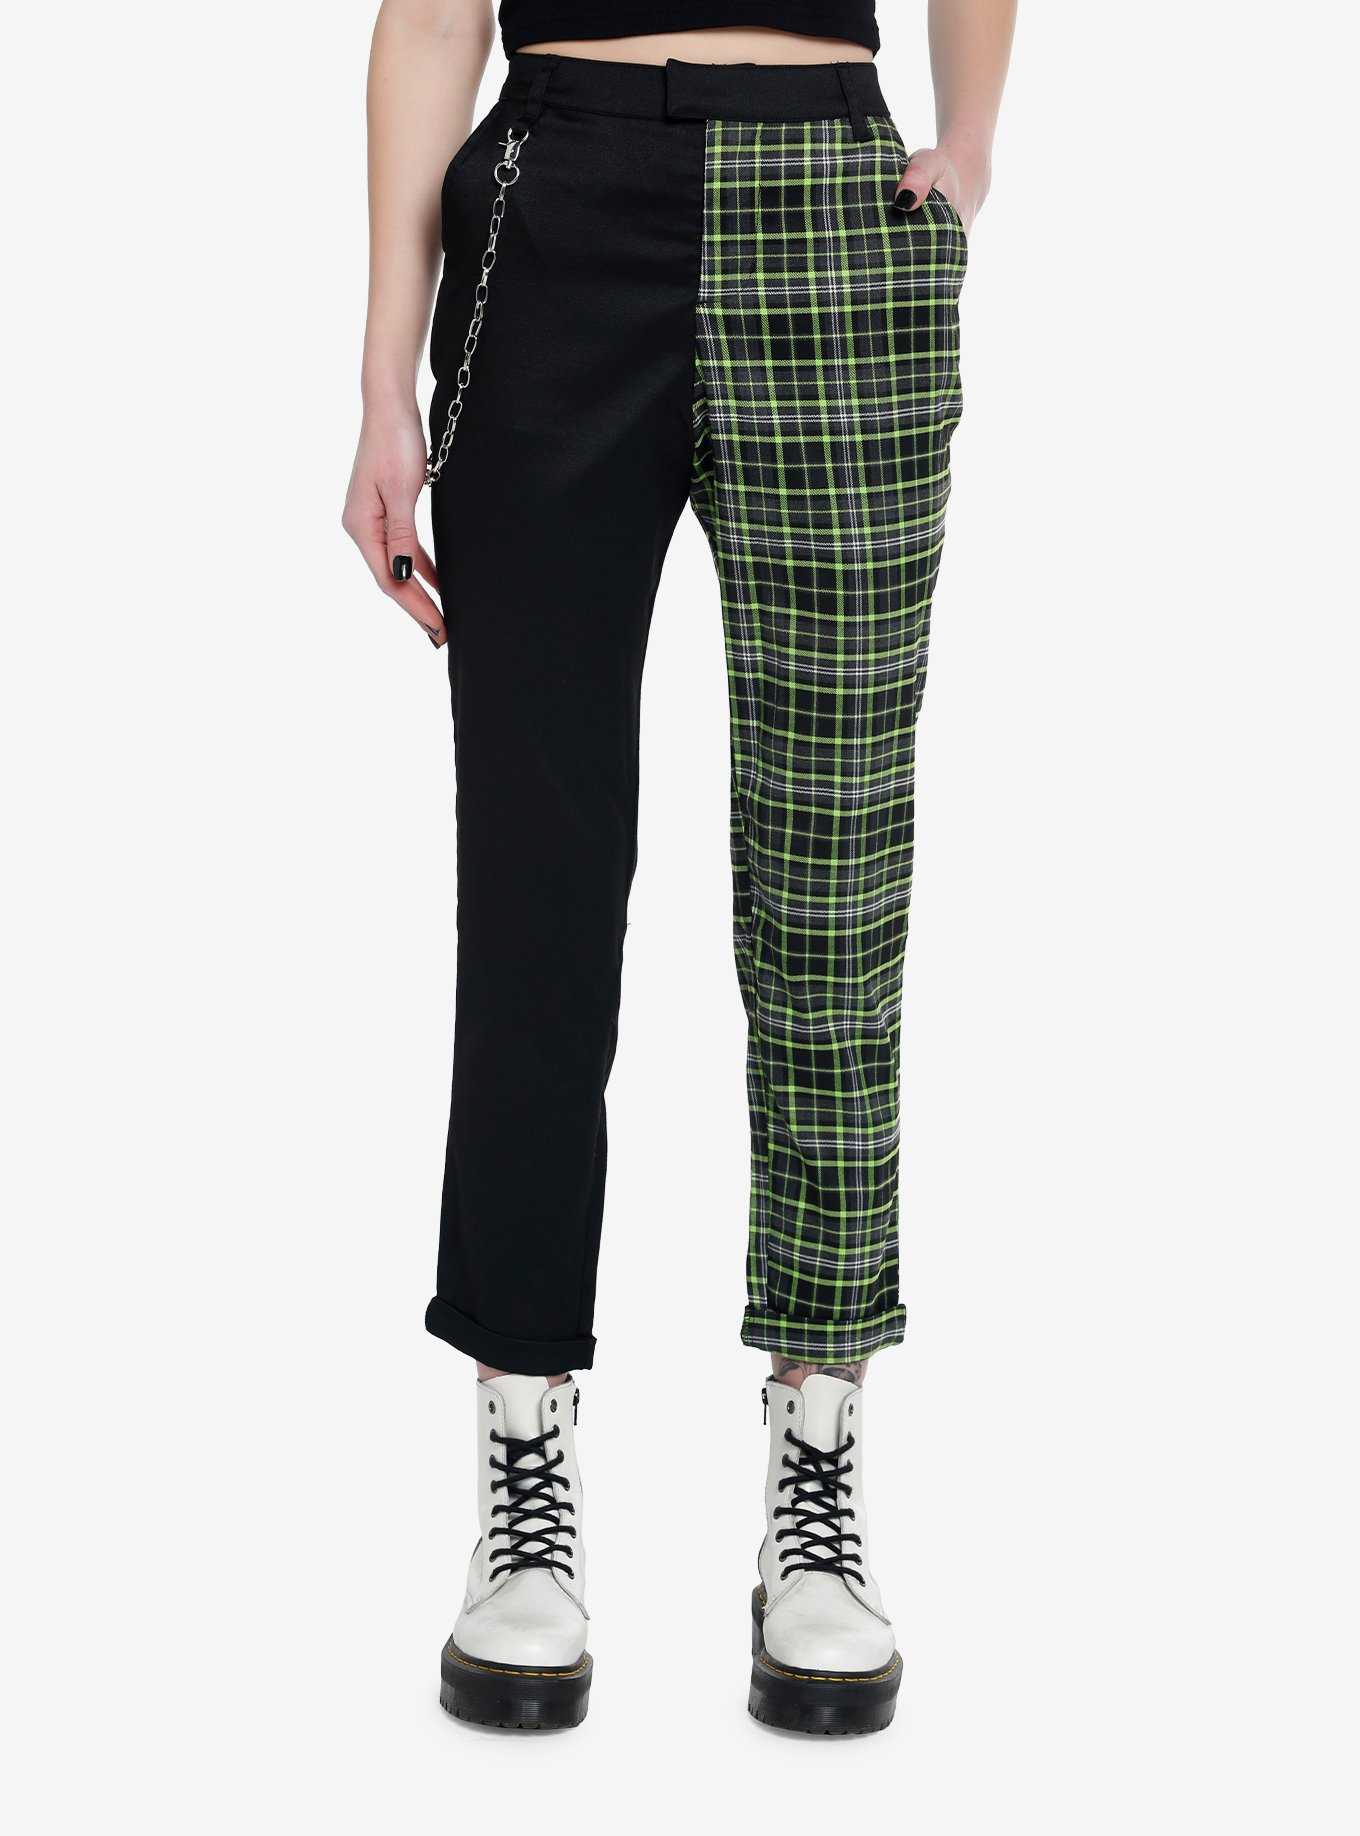 Hot Topic Pants Womens Small Red Black Plaid Mismatched